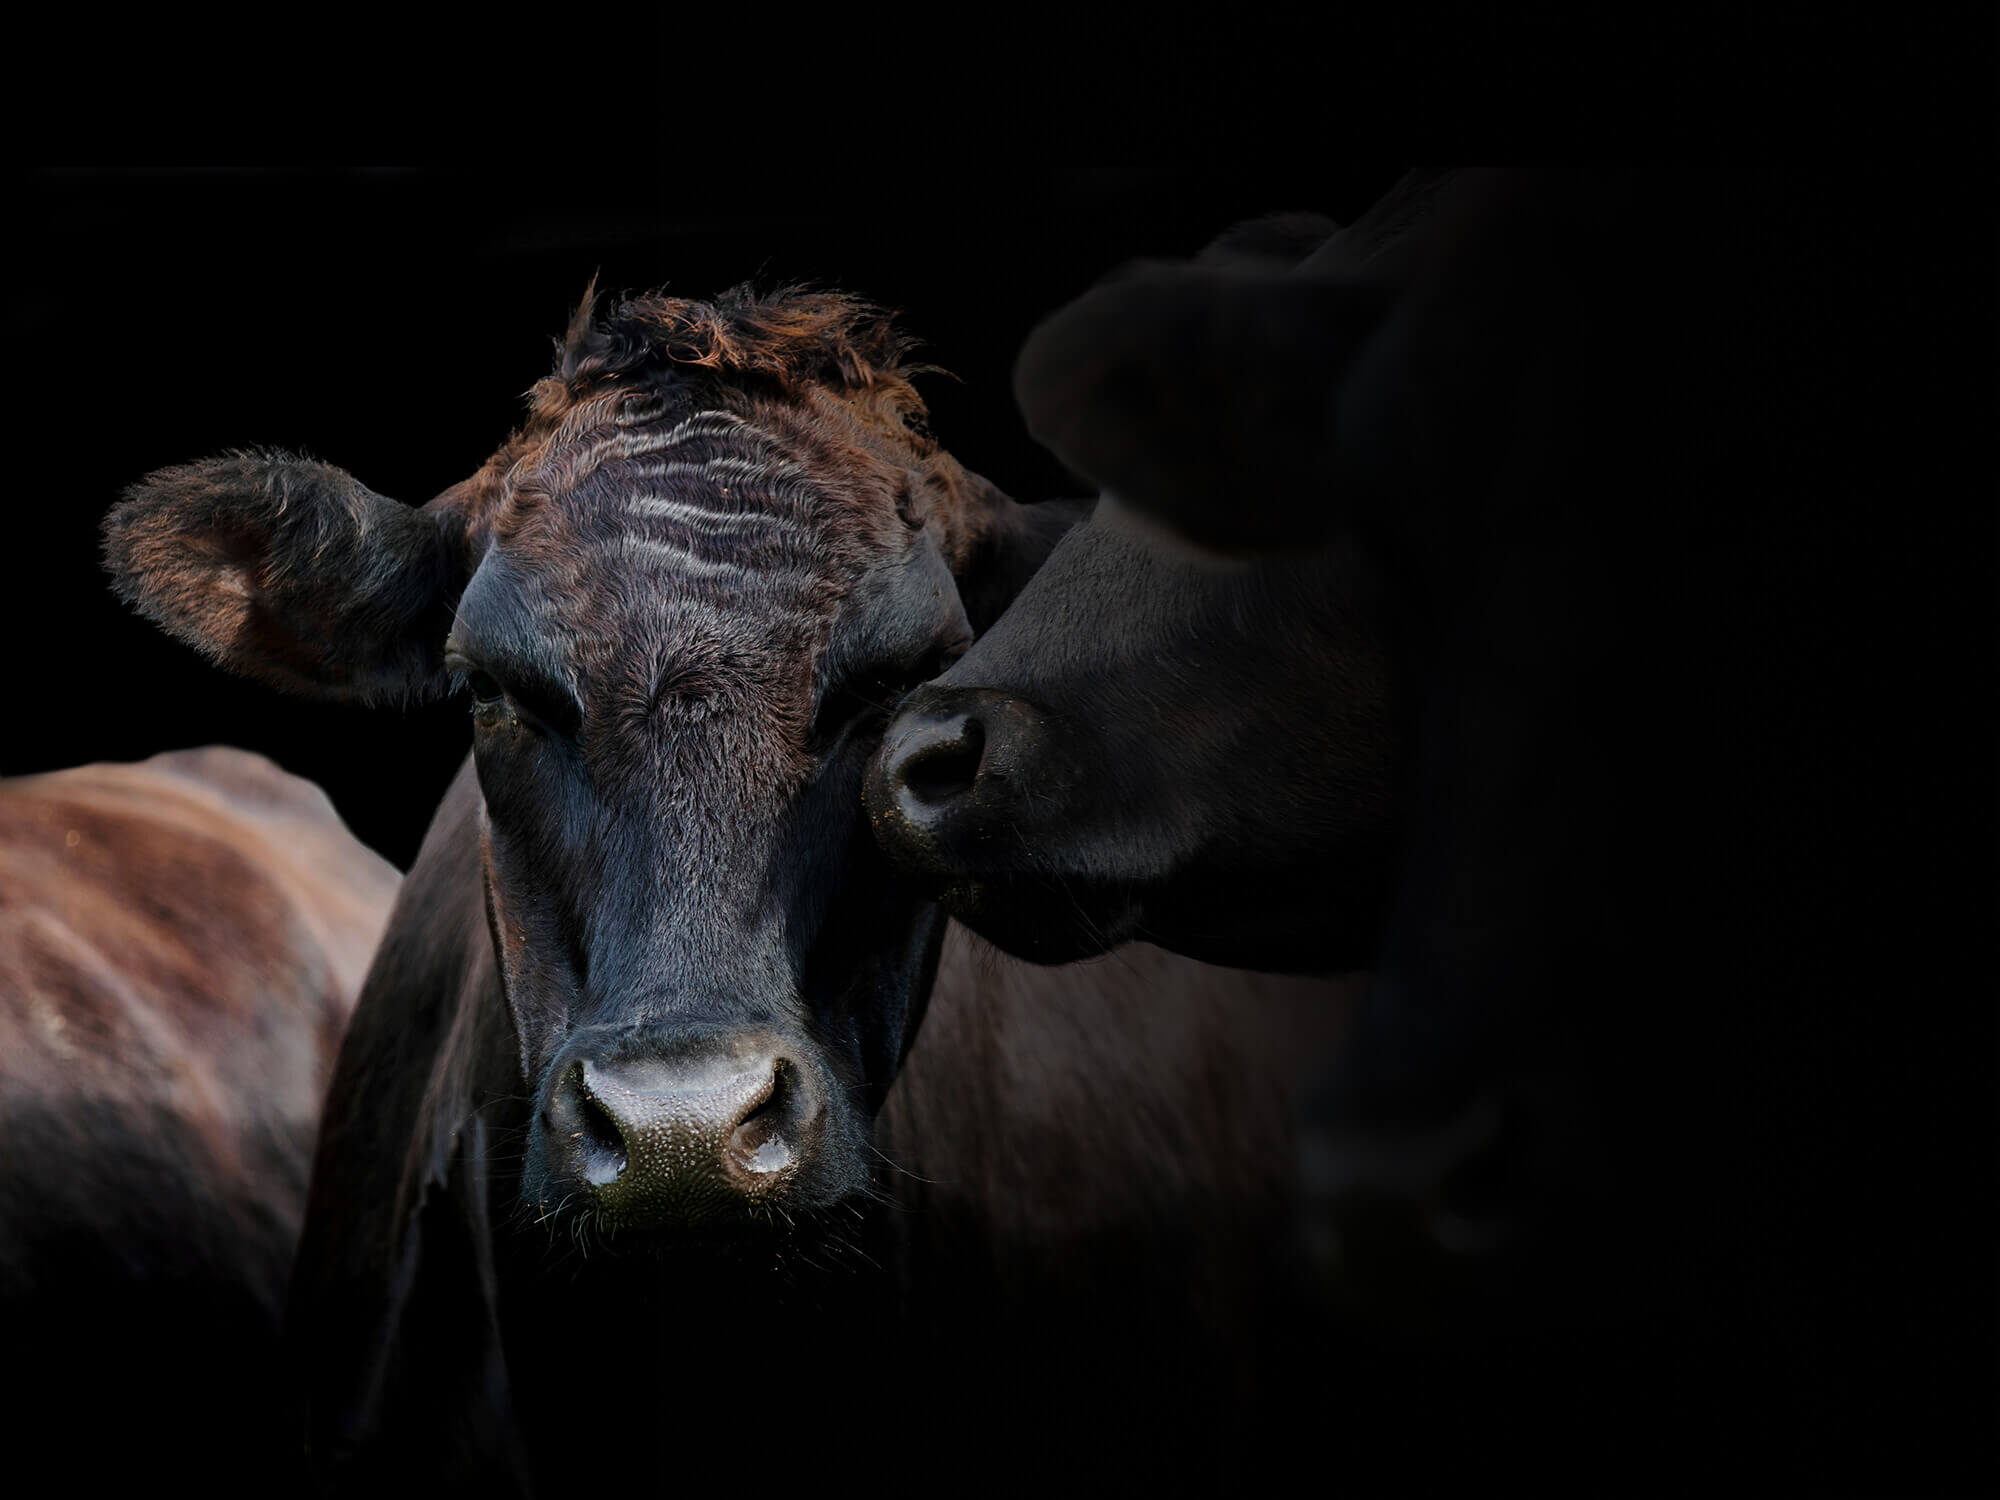 Dark moody photo of a cow